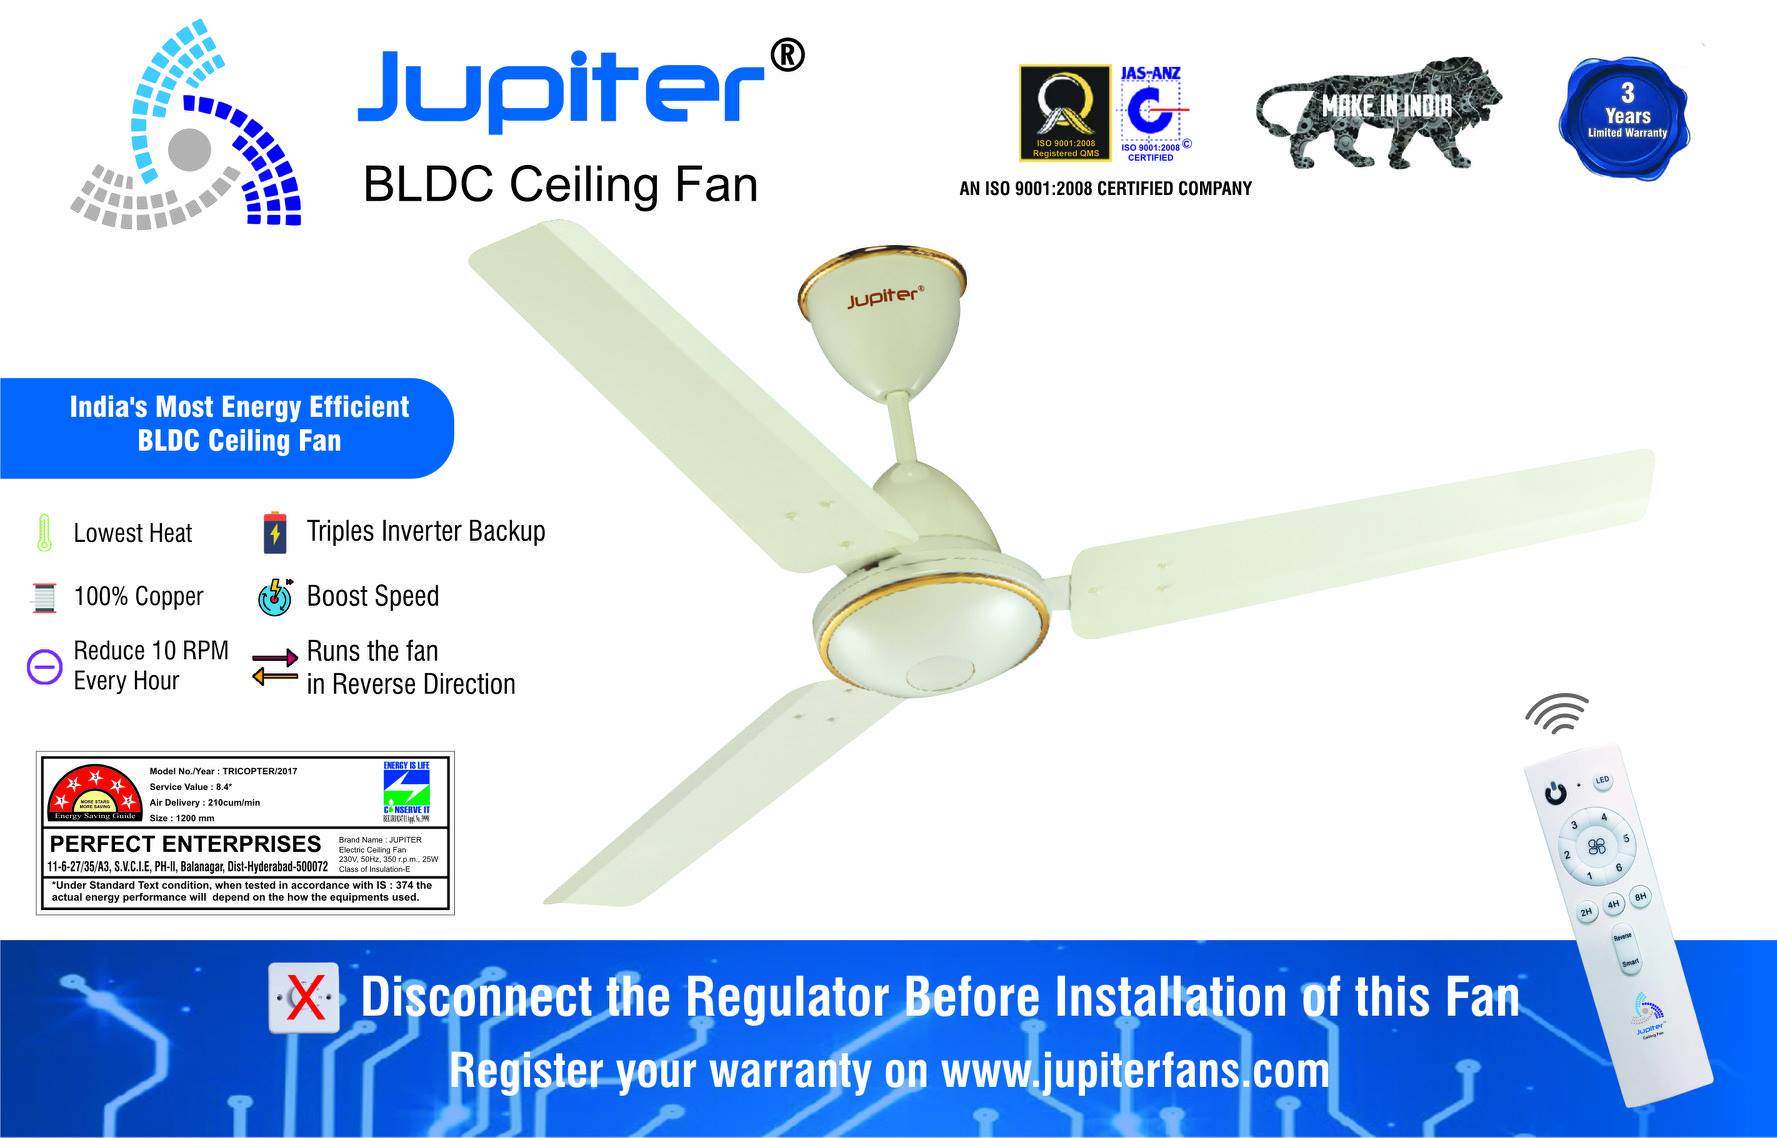 “Your electricity bill can be reduced by 70% at full speed; and can go as far as 1200% at lower speeds with inverter drive technology of Jupiter fans”